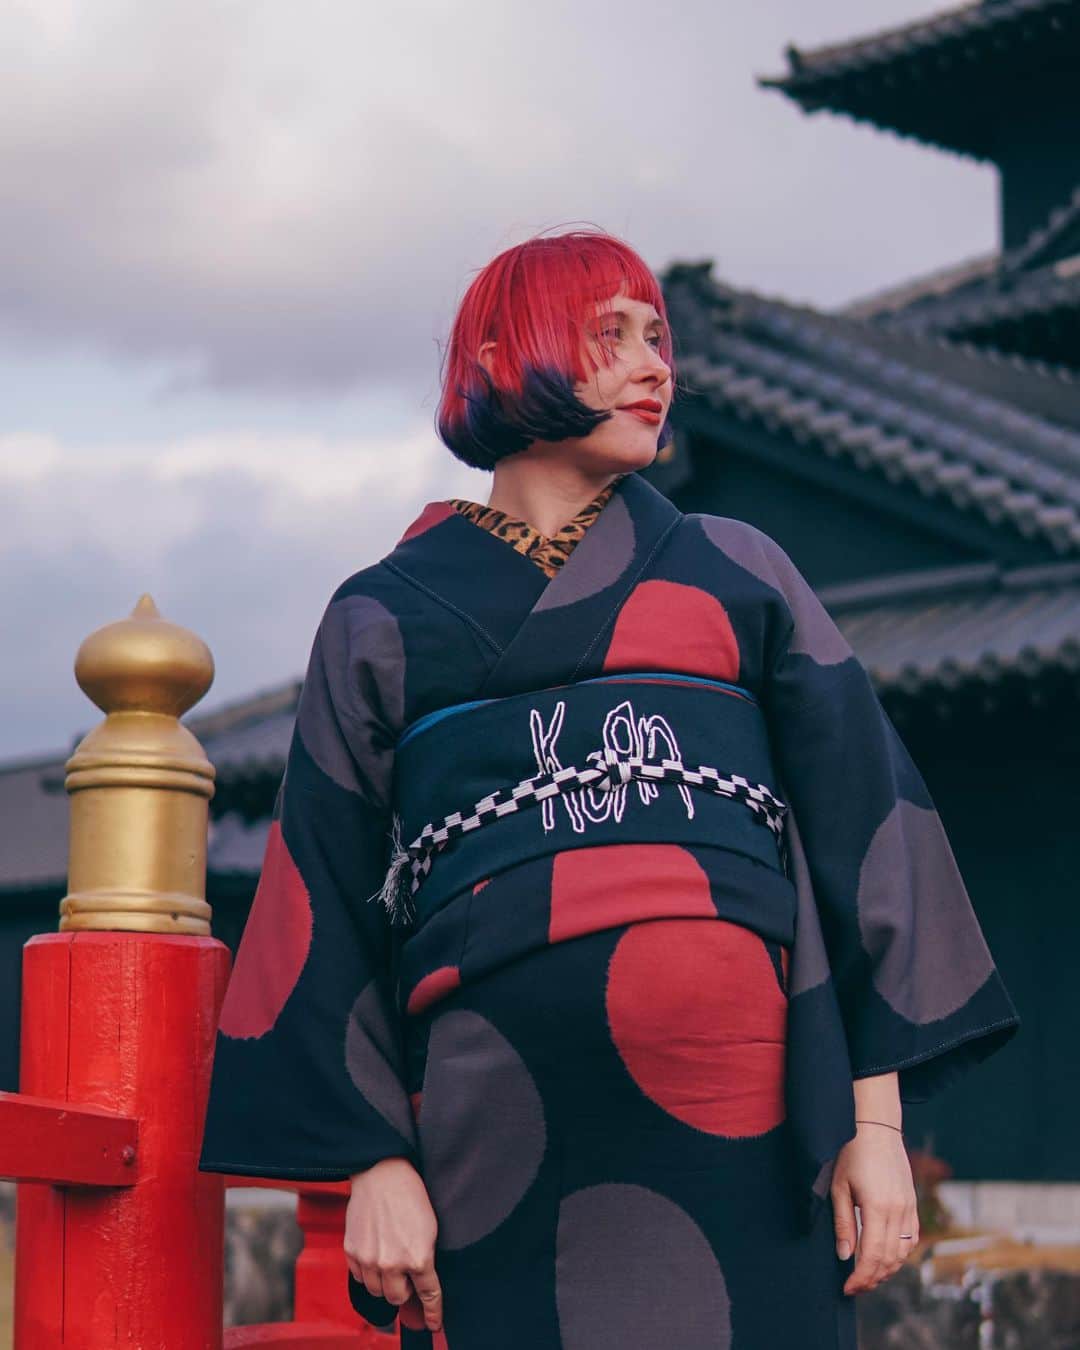 Anji SALZのインスタグラム：「Completely forgot to post these from my 8 month pregnancy when visiting @marutake_industries in Kagoshima.  Picked this kimono as it was still big enough to fit over my belly and ended up matching the surroundings 😂👀🤷🏻‍♀️  The @korn_official obi is self-made / upcycled from a second hand shirt of them and an old obi belt.  I need more band kimono stuff in my life 😂😂  #kimono #japan #marutake #ootd #polkadots #japanesekimono #kagoshima」